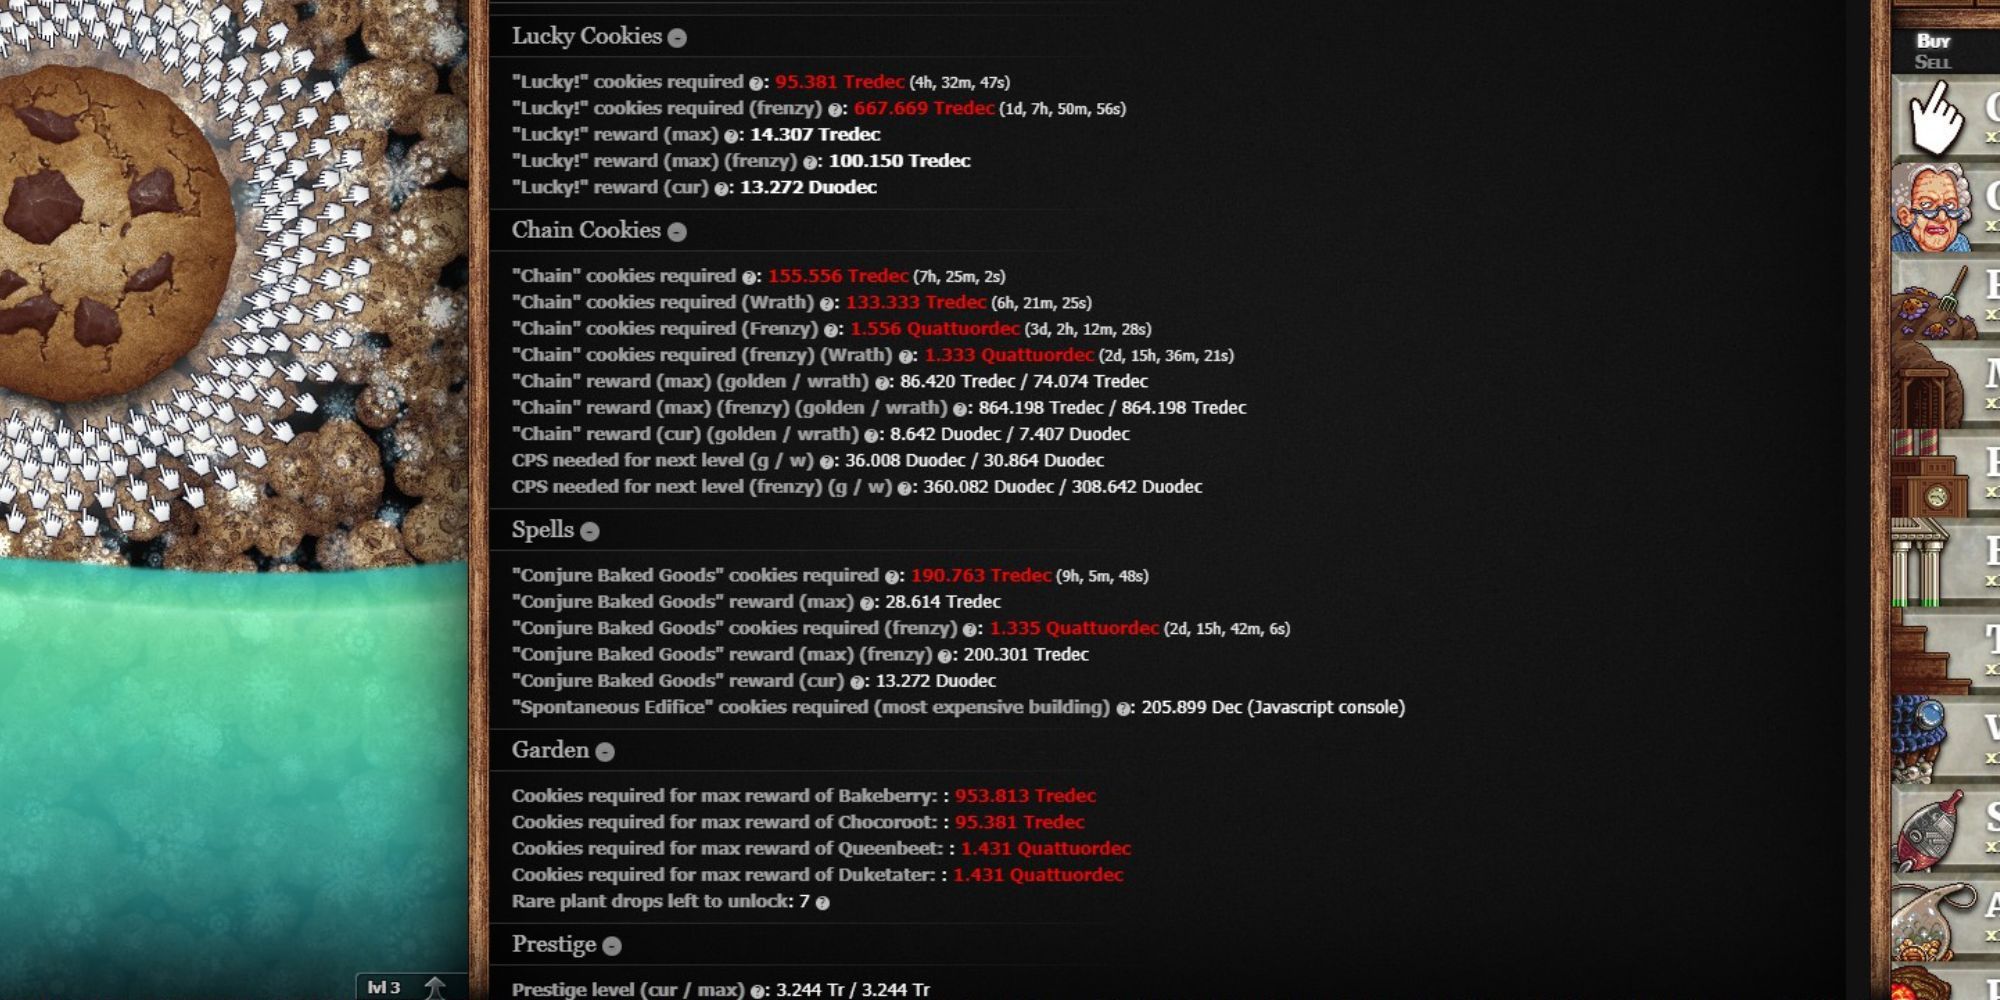 A wall of text with particularly useful information highlighted in red.